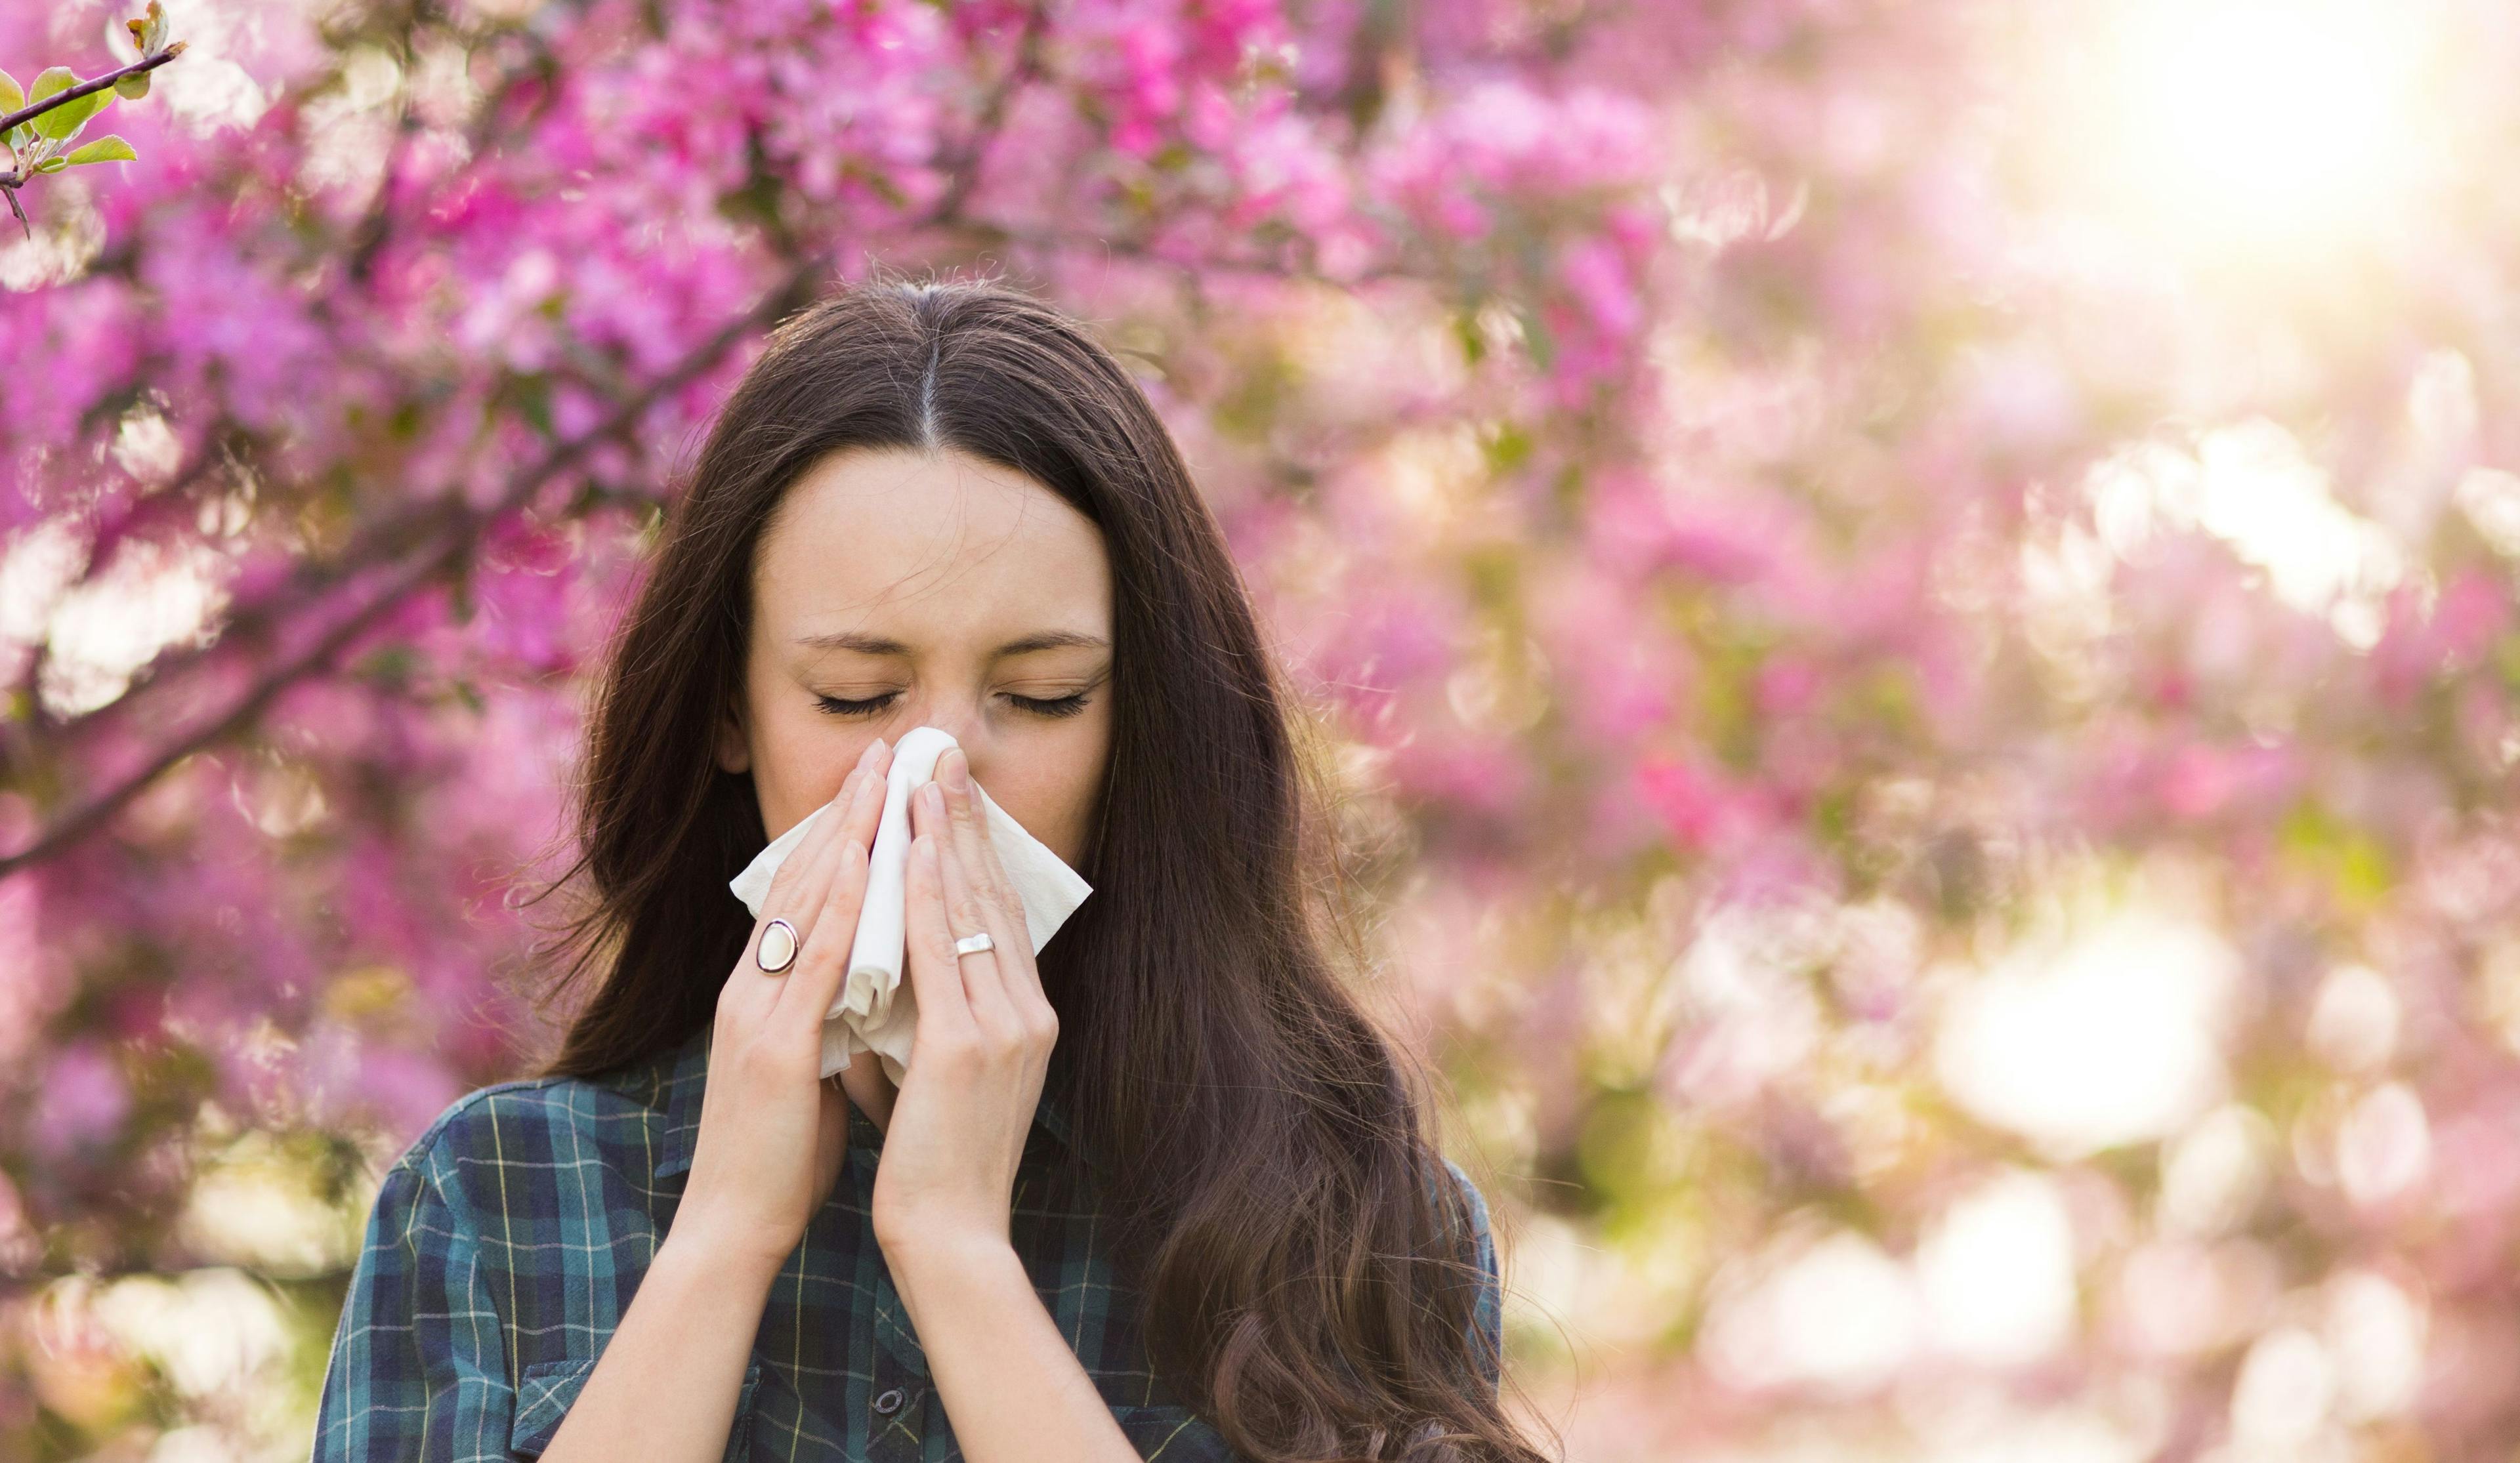 Woman blowing nose because of spring pollen allergy - Image credit: Budimir Jevtic | stock.adobe.com